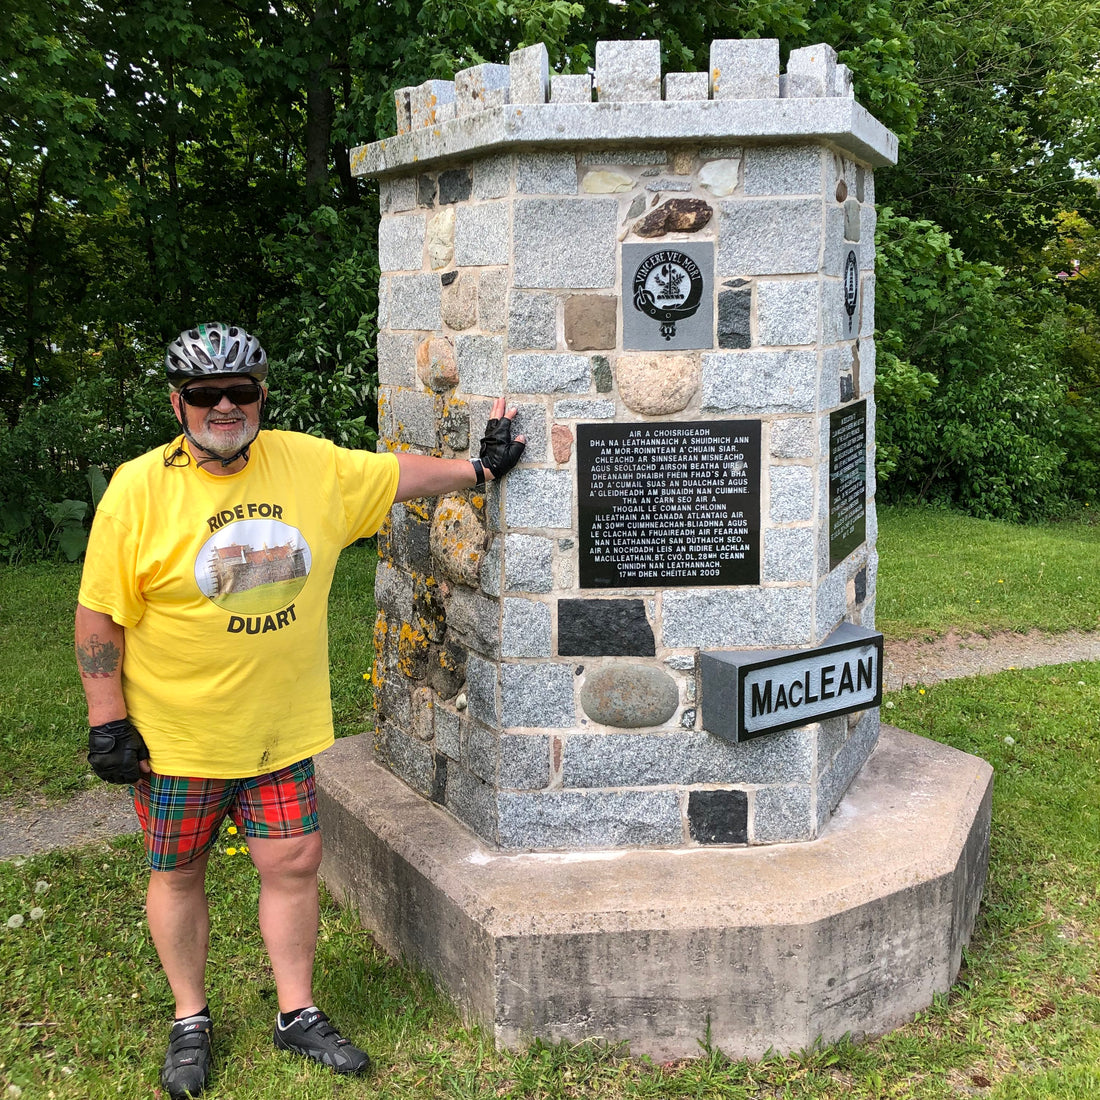 The Ride for Duart: One Man's Journey to Help Save a Castle (Part I)